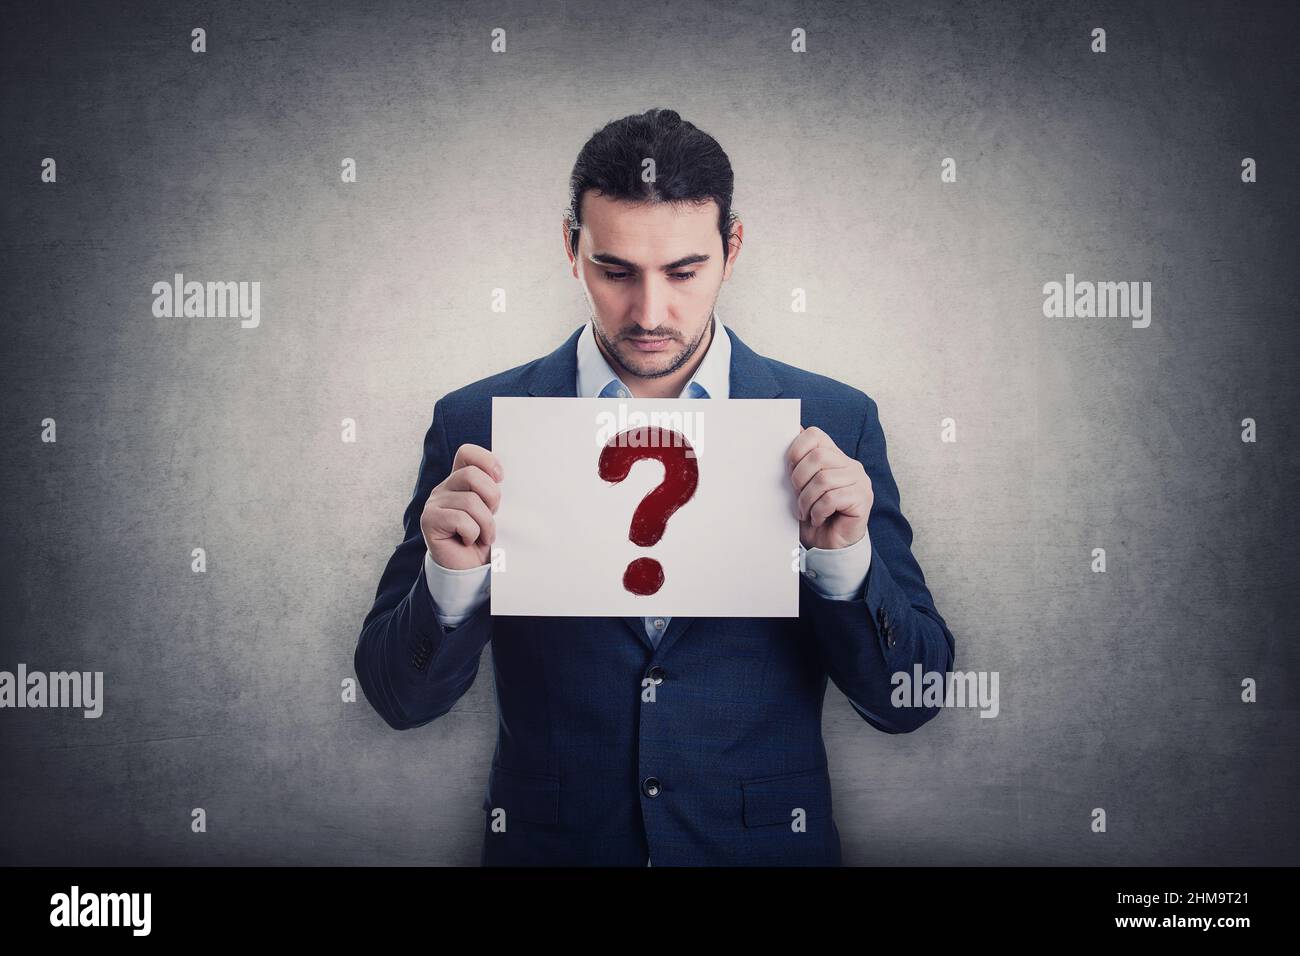 Doubtful businessman holding a paper sheet with question symbol, isolated on grey wall background. Depressed person looking down pensive. Interrogatio Stock Photo